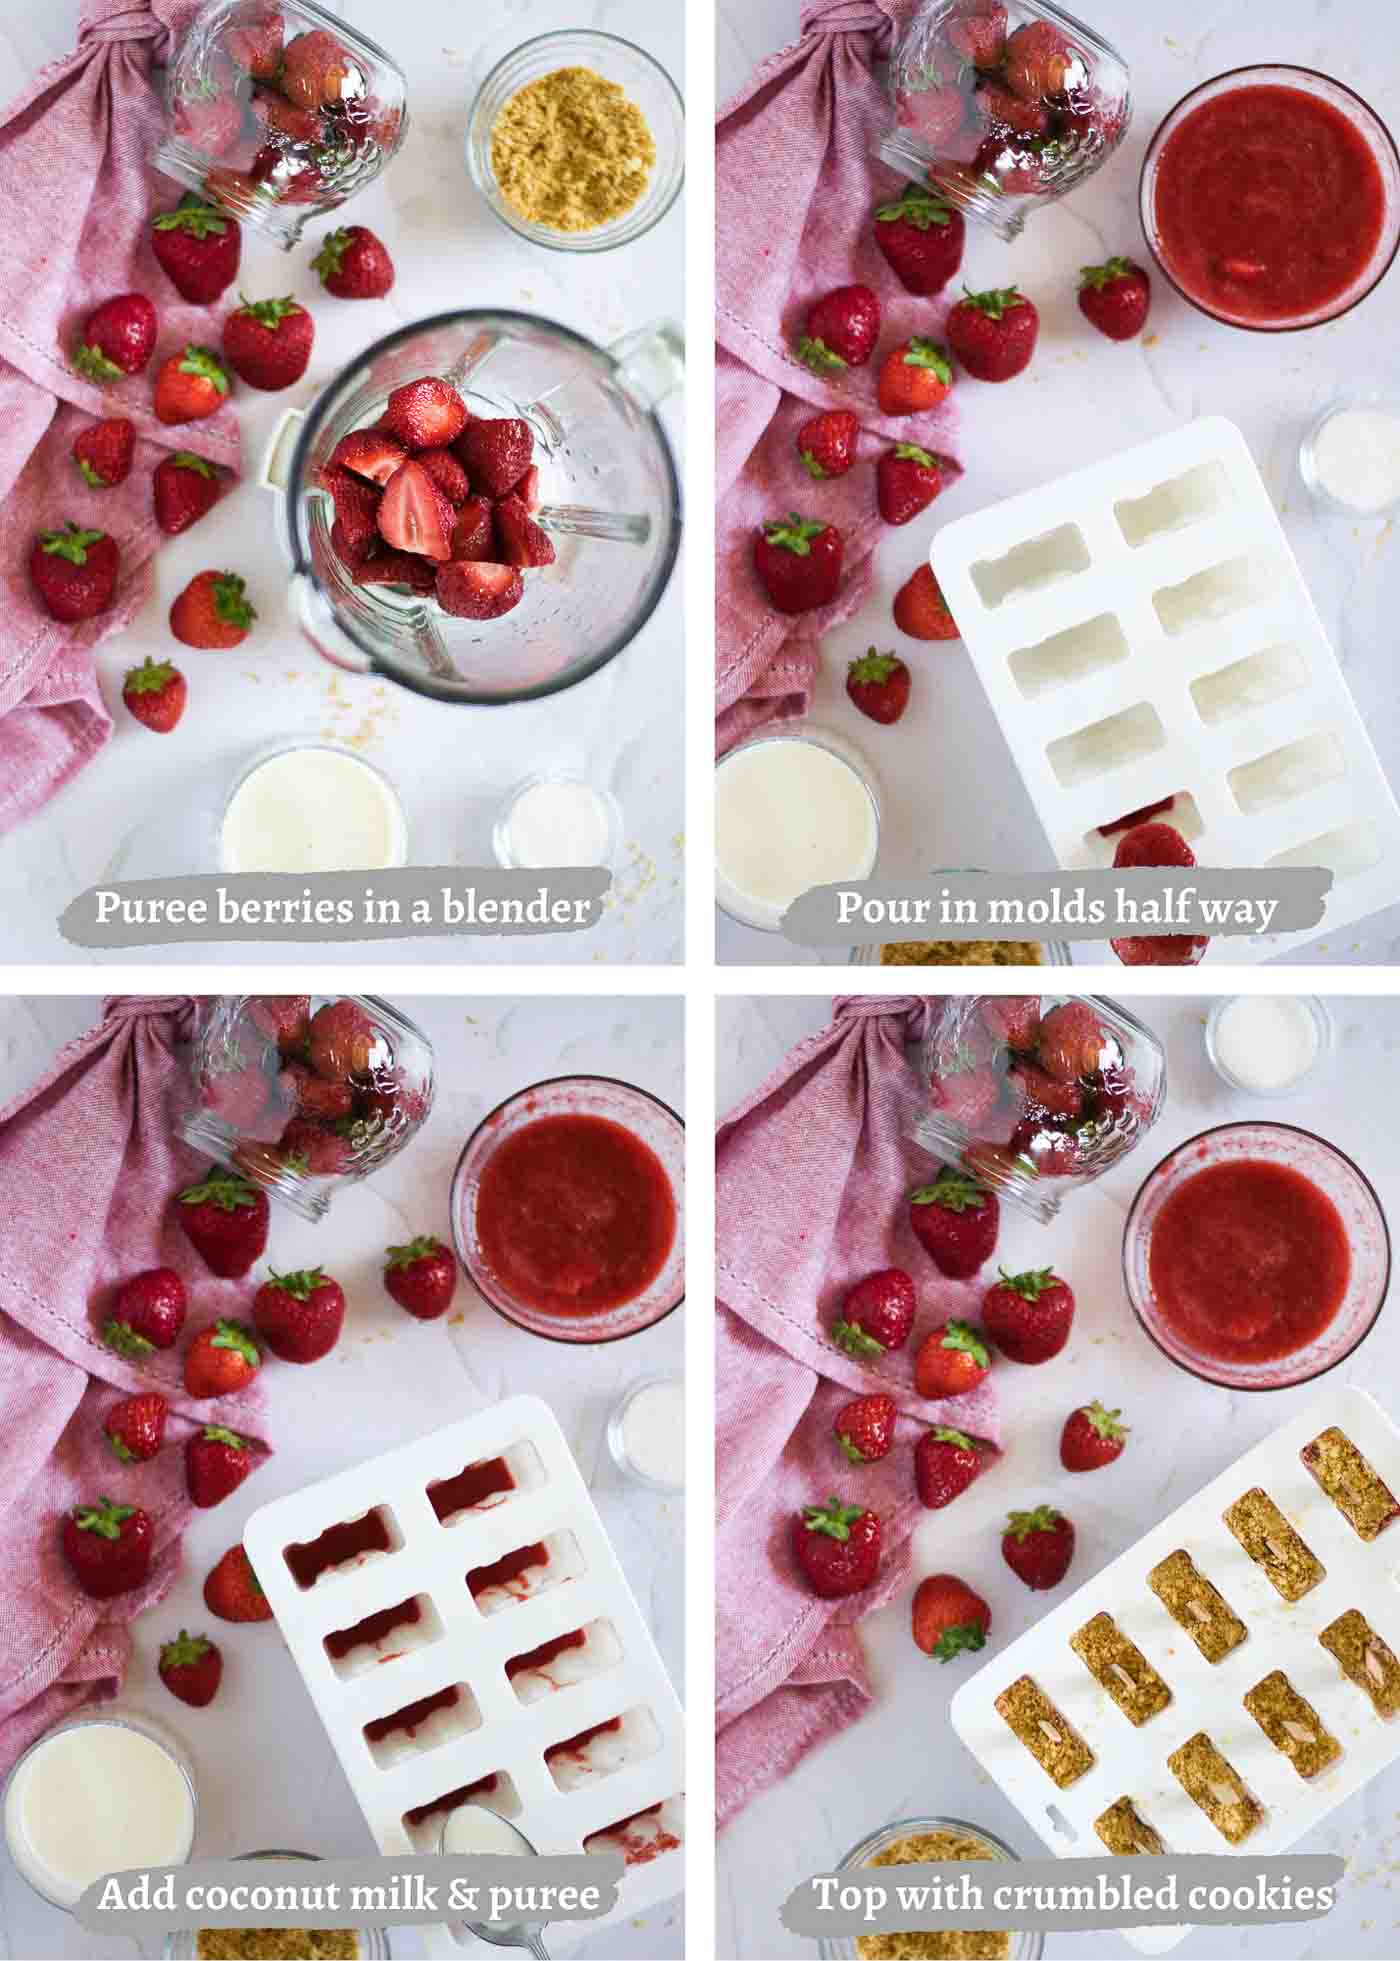 making strawberry popsicles - process images